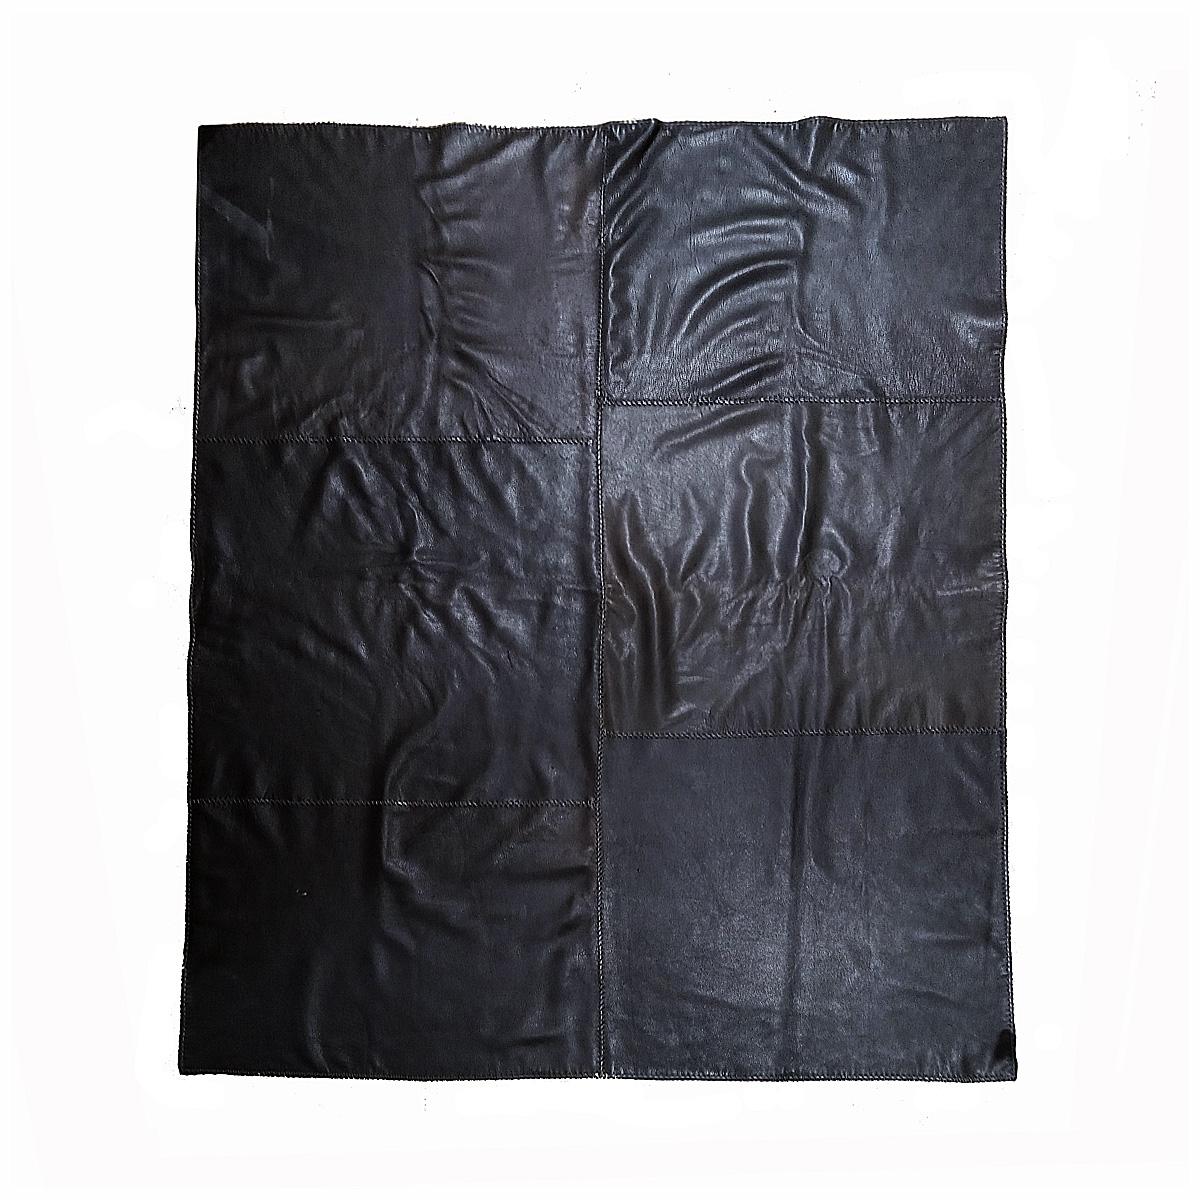 A leather and wool blanket or throw, handcrafted in New Mexico around 2015. 

Supple, soft and flexible deer hide patches in black / ebony brown, beautifully sewn together quilt-style, on a whole piece of gray virgin wool. Its thickness, softness